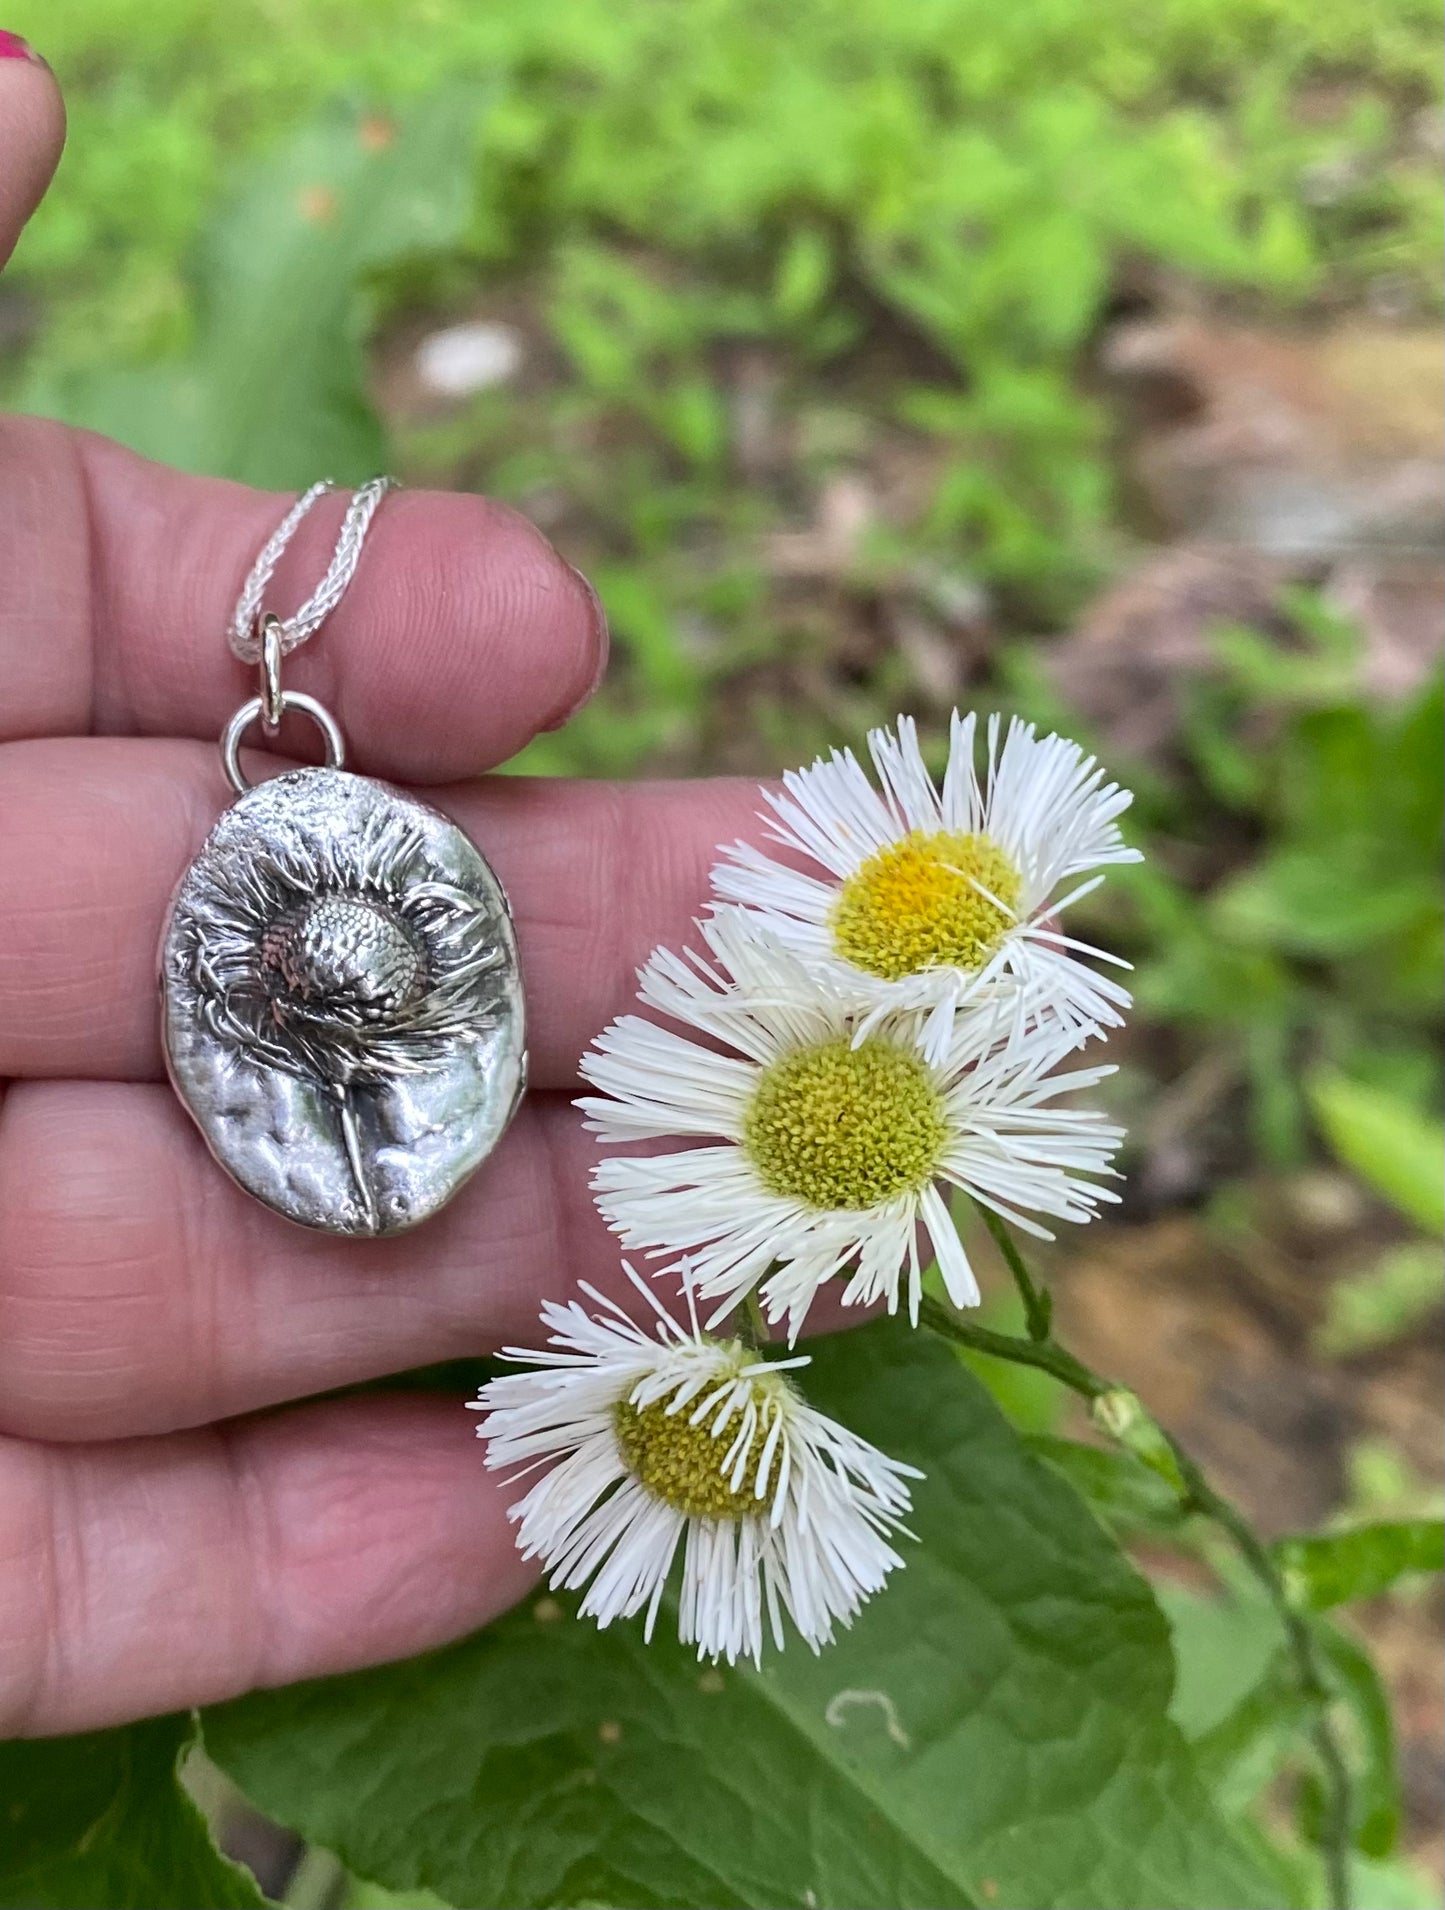 Wildflower necklace - collectionsbytracy.com